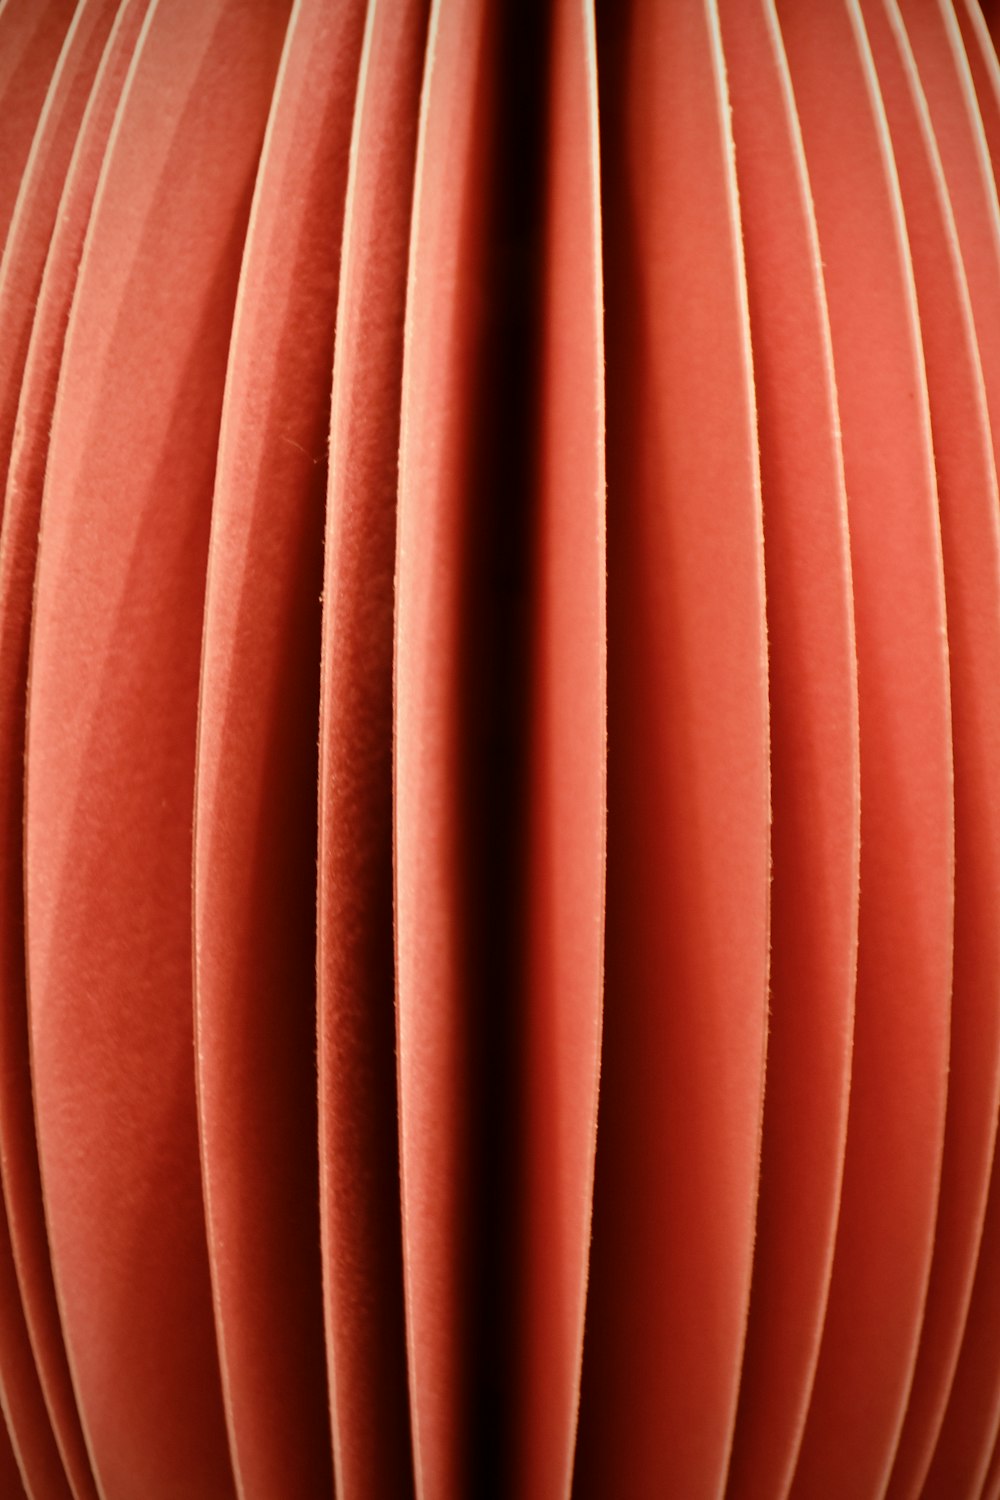 a close up of a round object made of paper